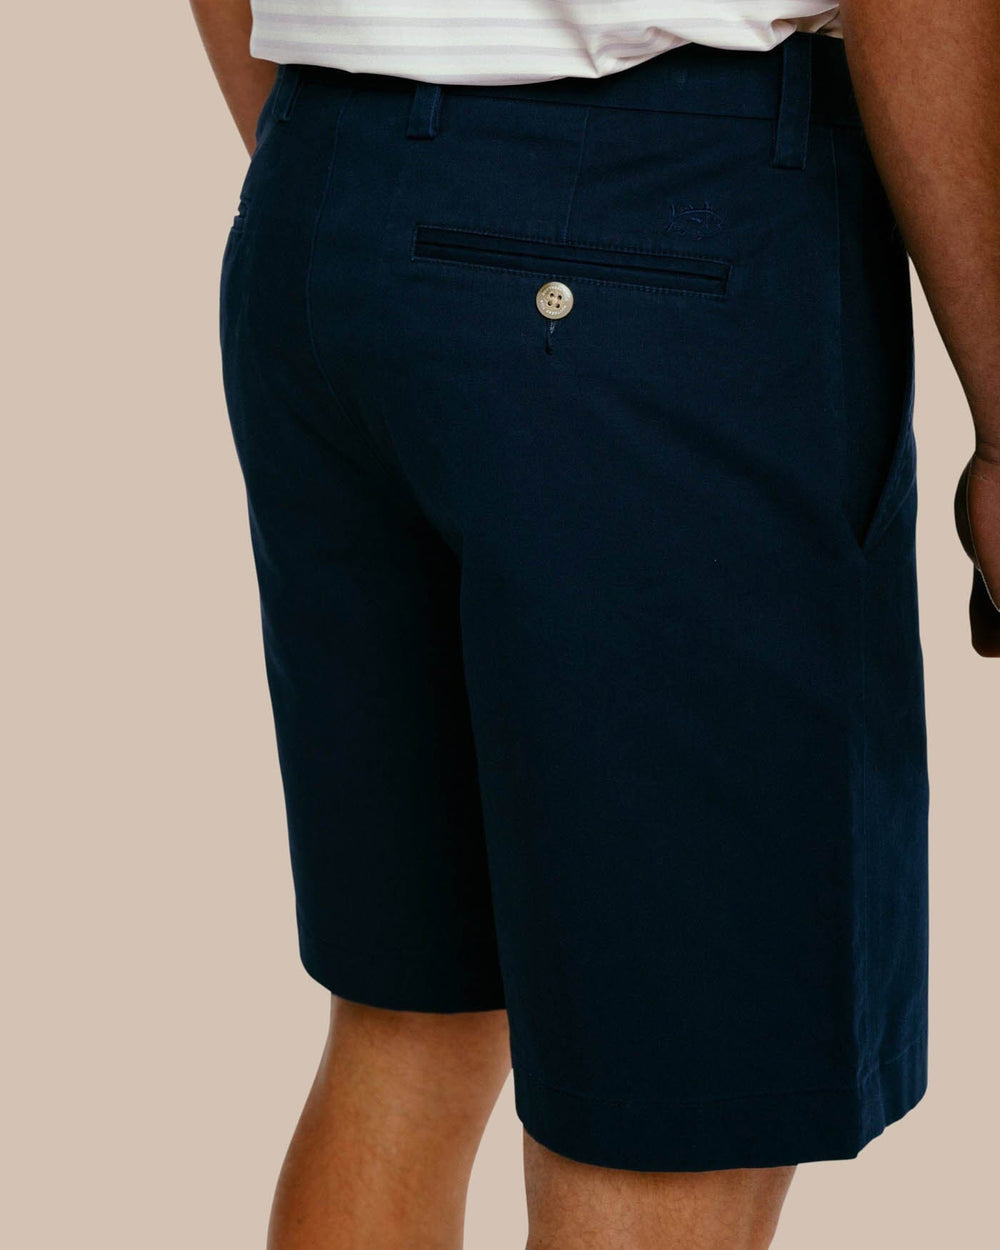 The pocket view of the Men's New Channel Marker 9 Inch Short by Southern Tide - True Navy